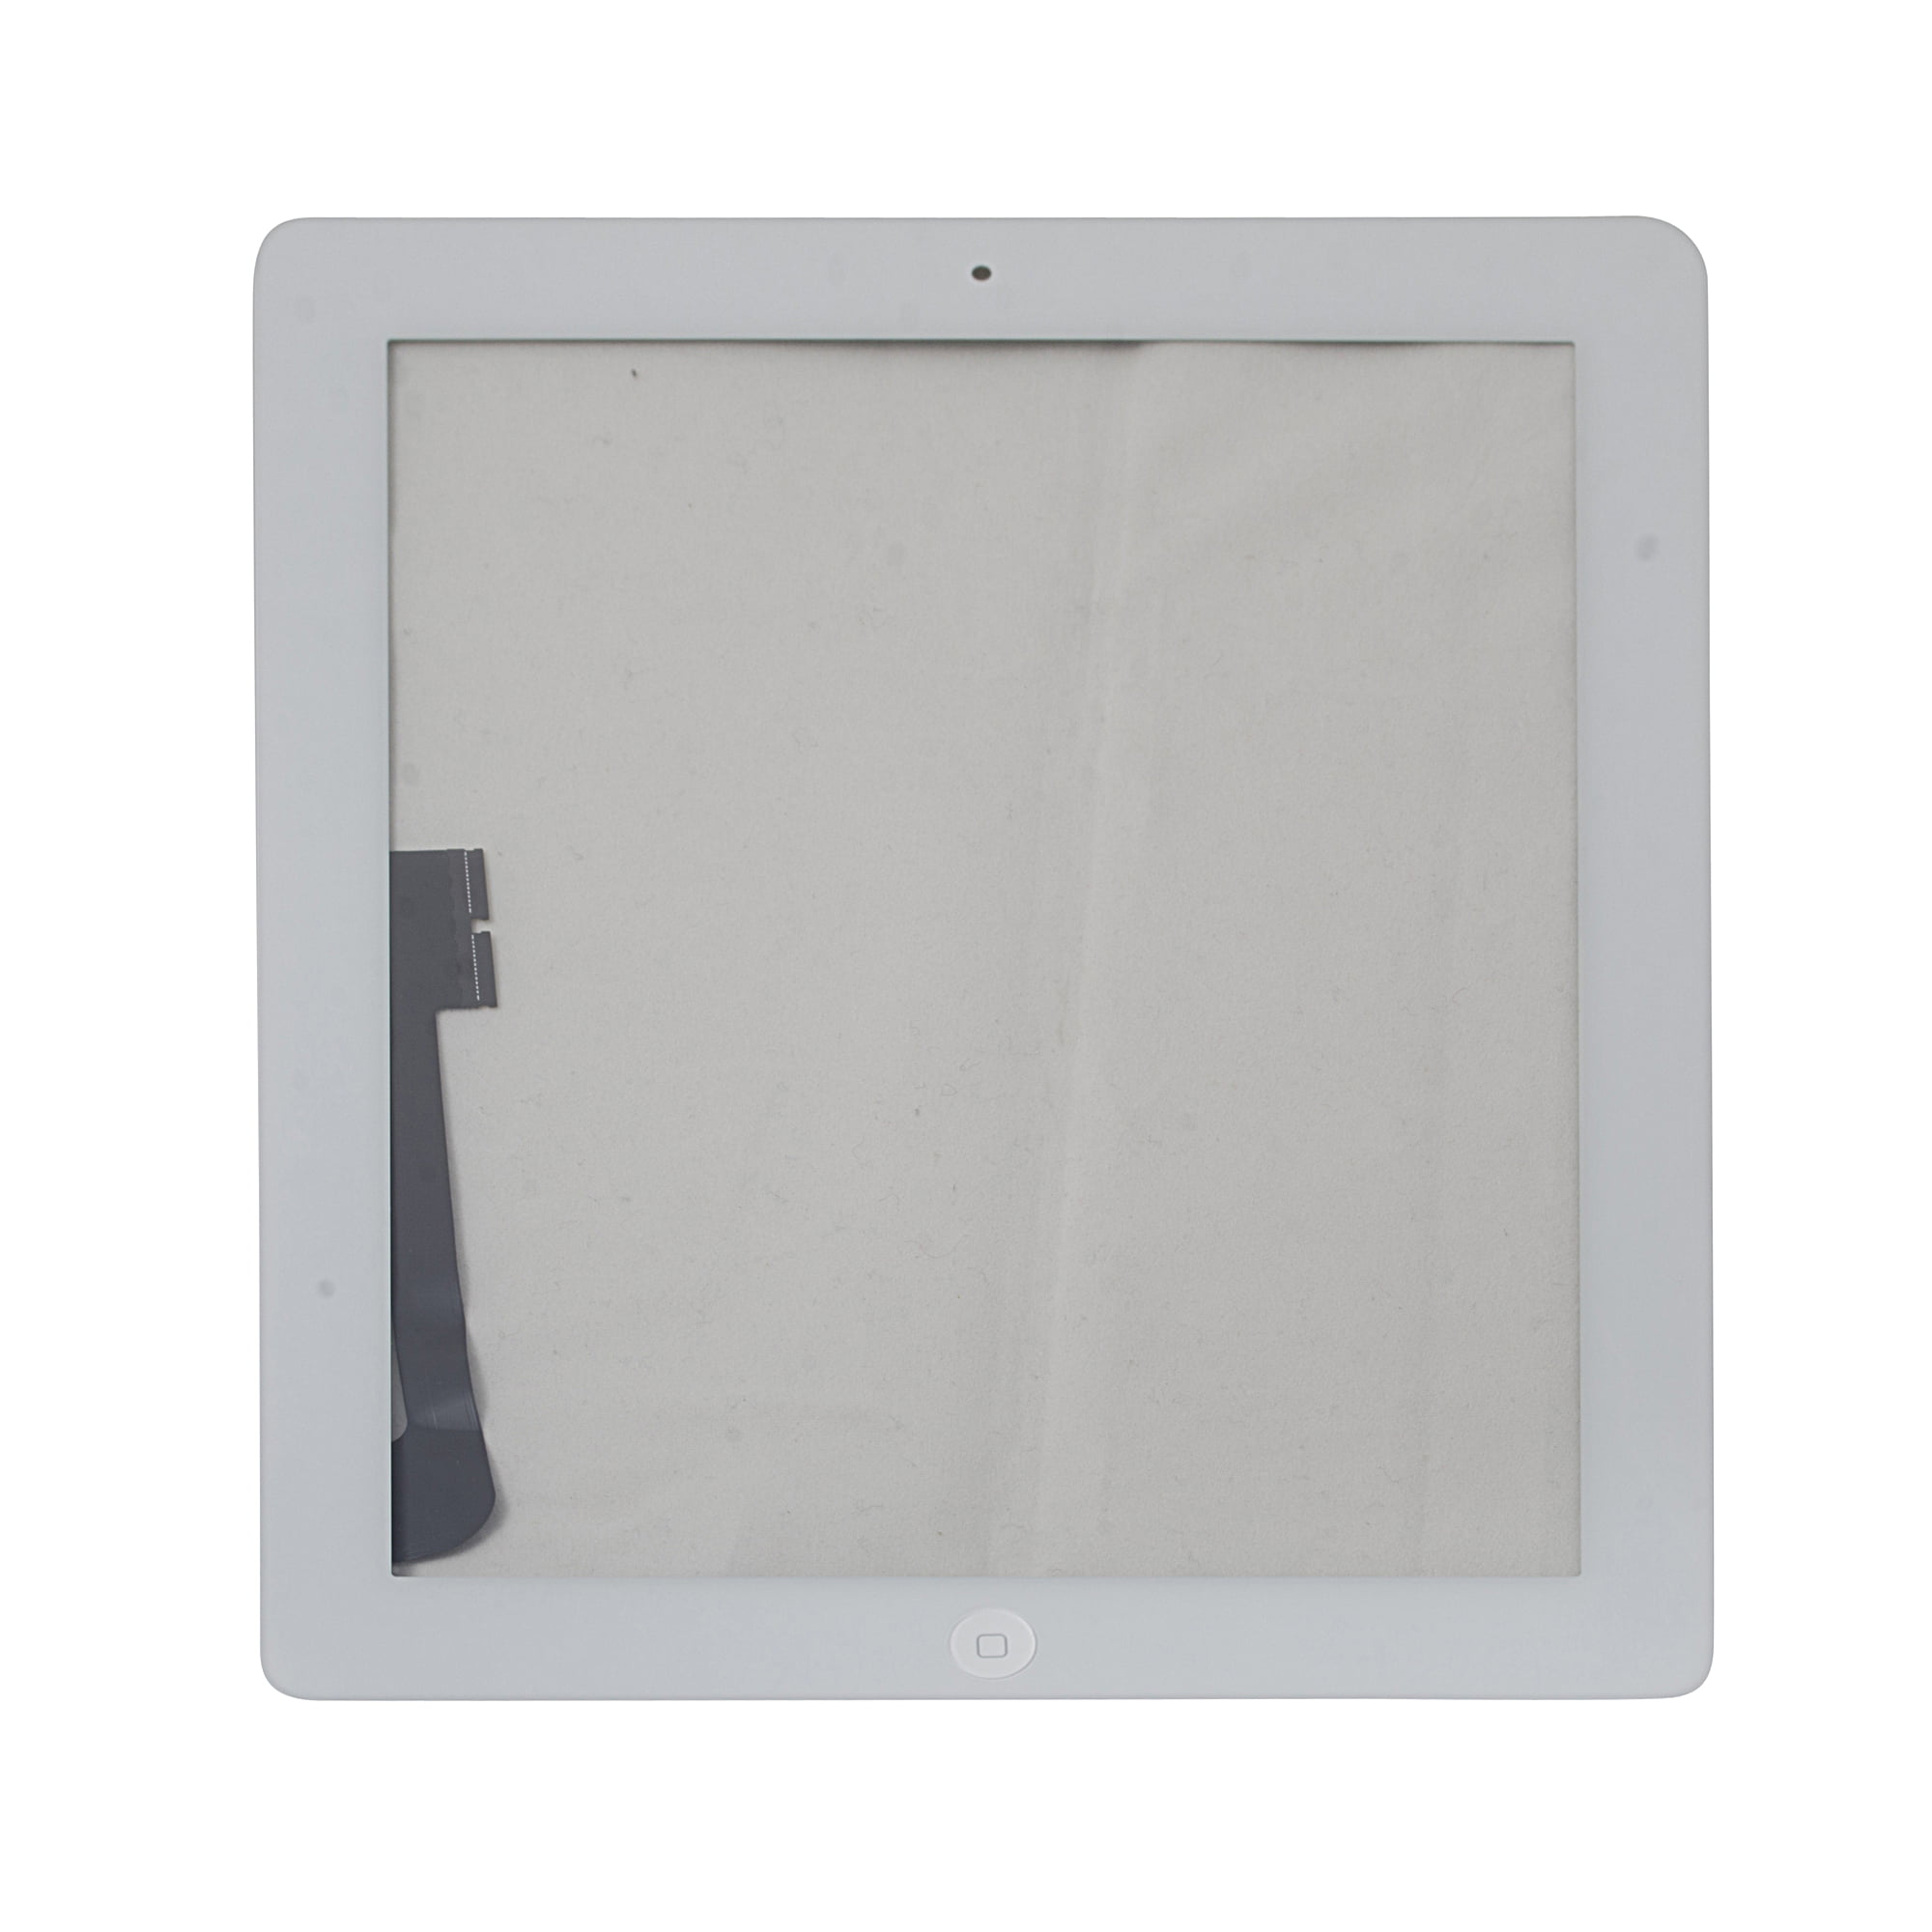 5x Set Digitizer Touch Screen Adhesive Sticker Pads Replacement for iPad  Air 1 2